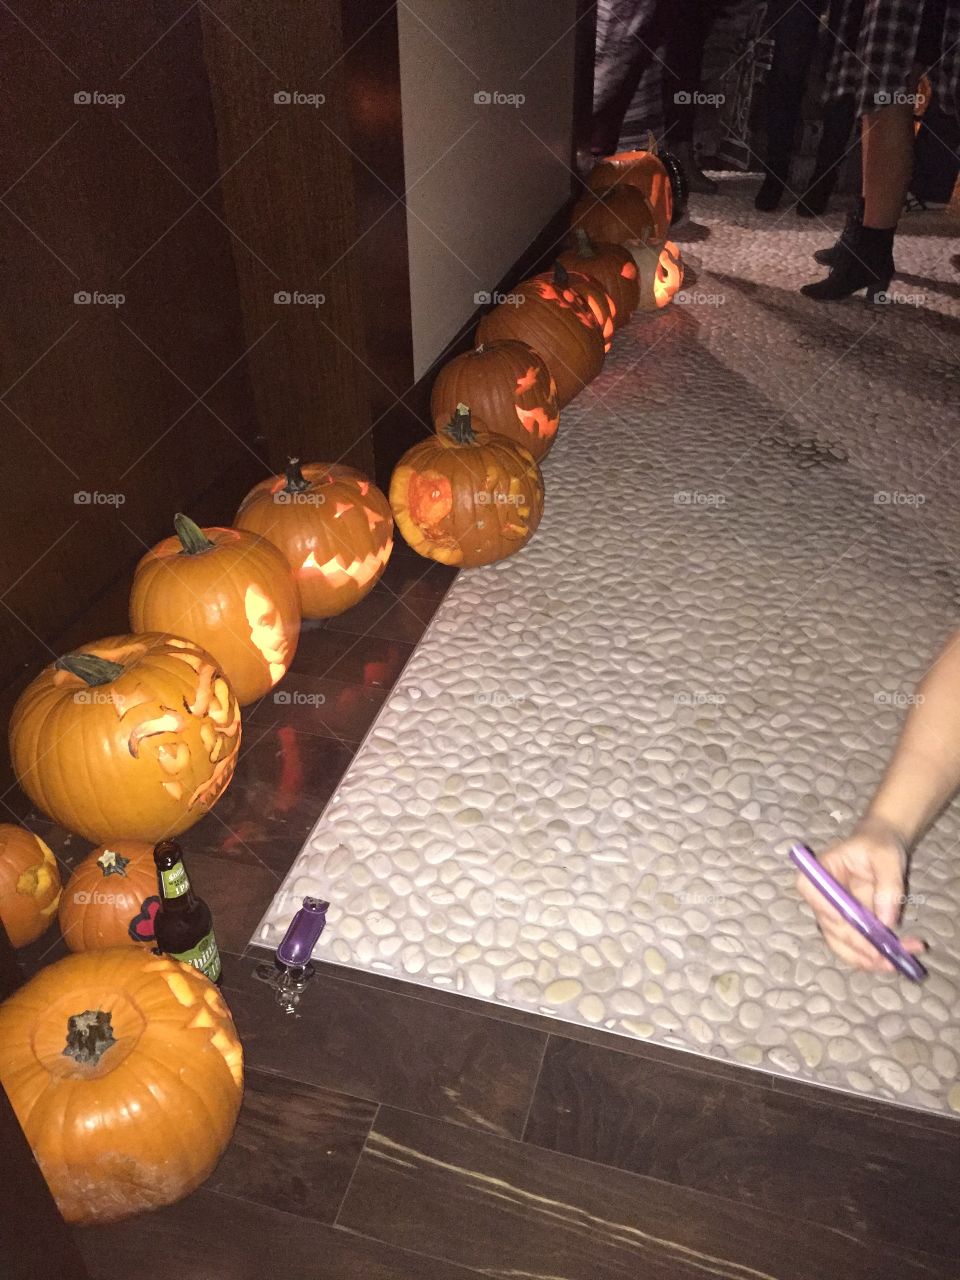 Pumpkin carving contest in Houston Texas